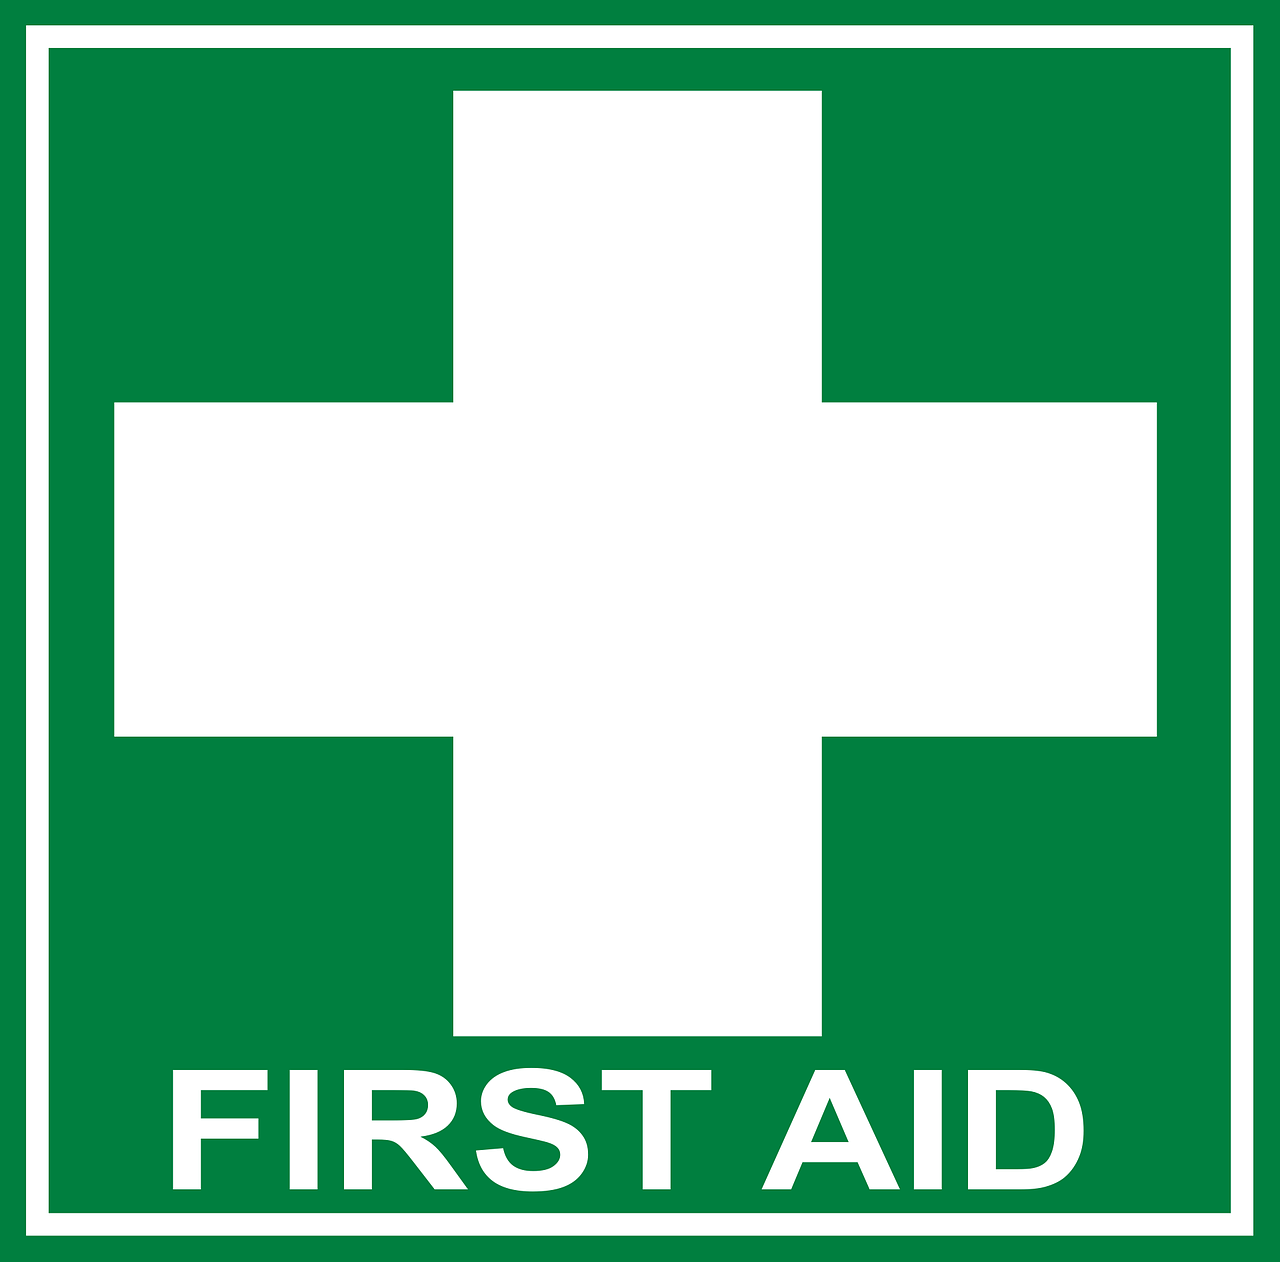 First Aid at Work